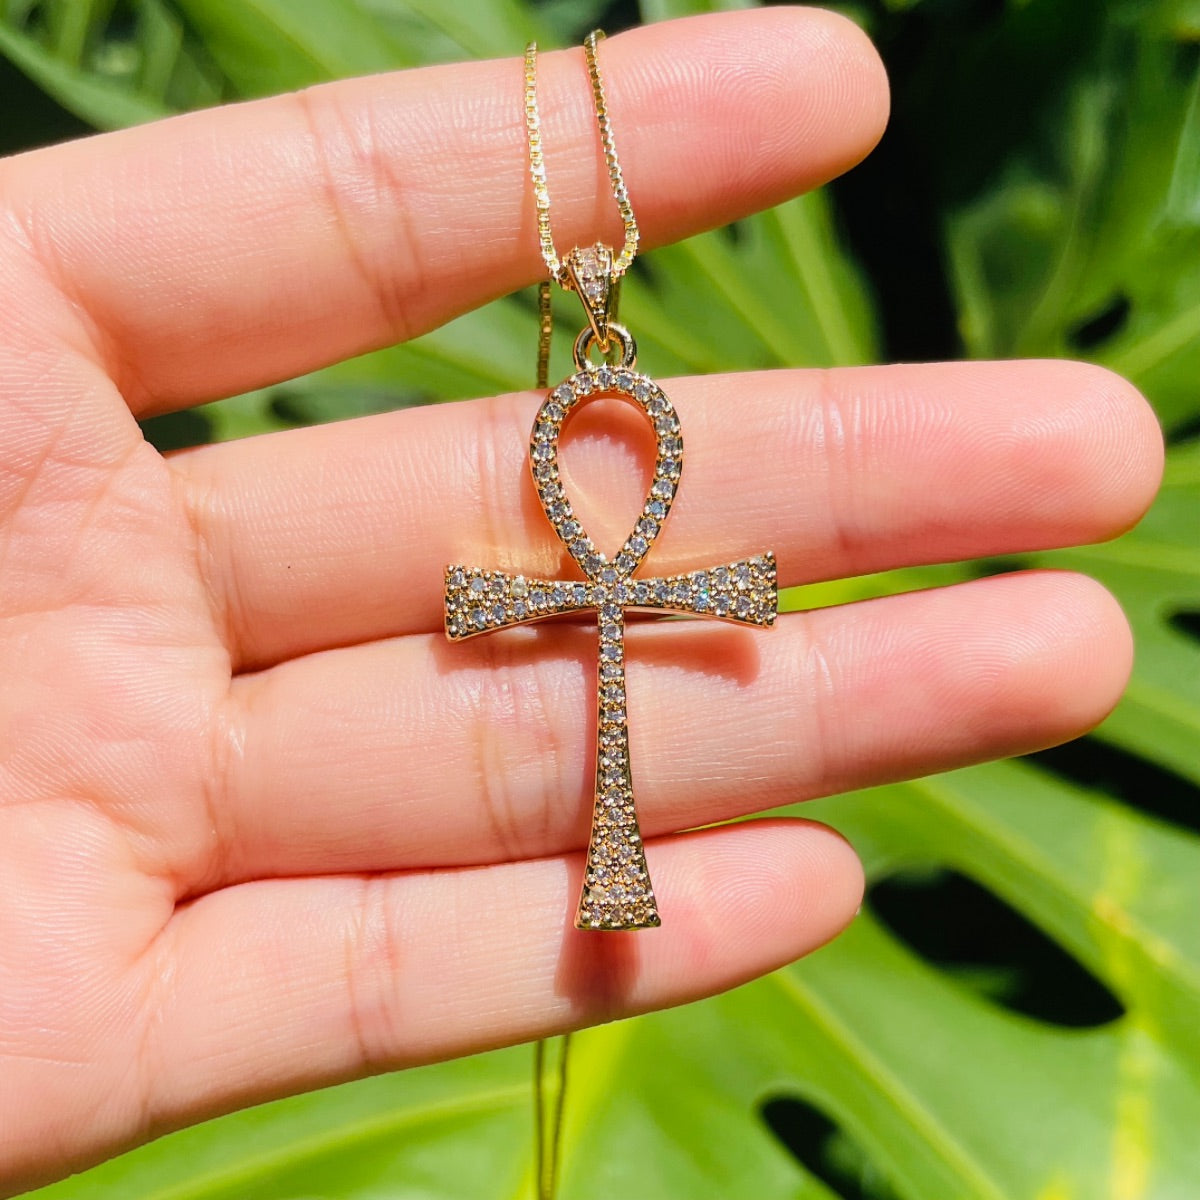 5pcs/lot 47*23mm CZ Paved ANKH Necklaces Necklaces Charms Beads Beyond